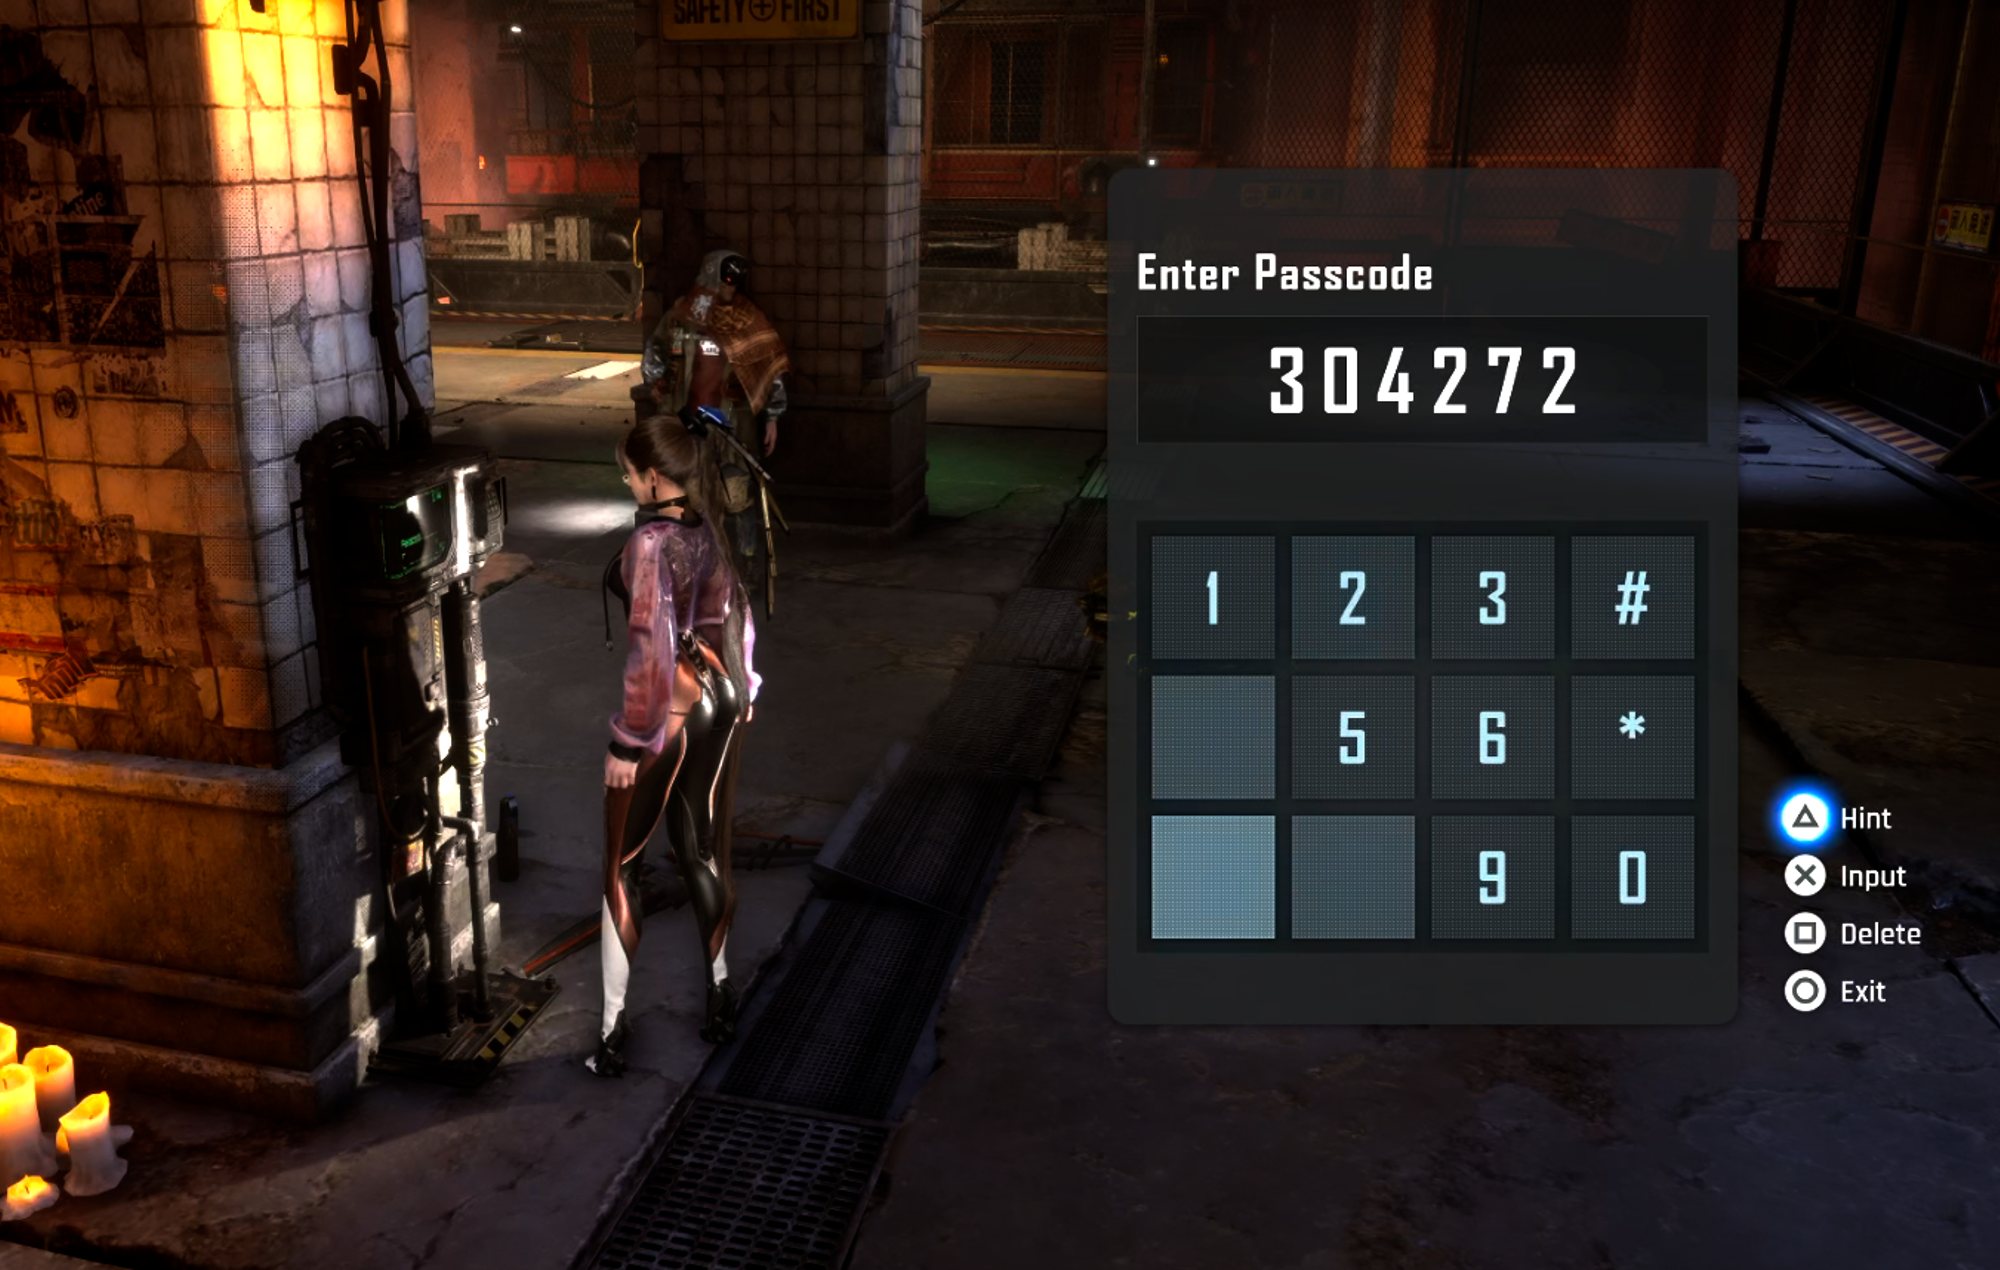 Stellar Blade Simple Puzzle Answer: Eve can be seen putting the code in.